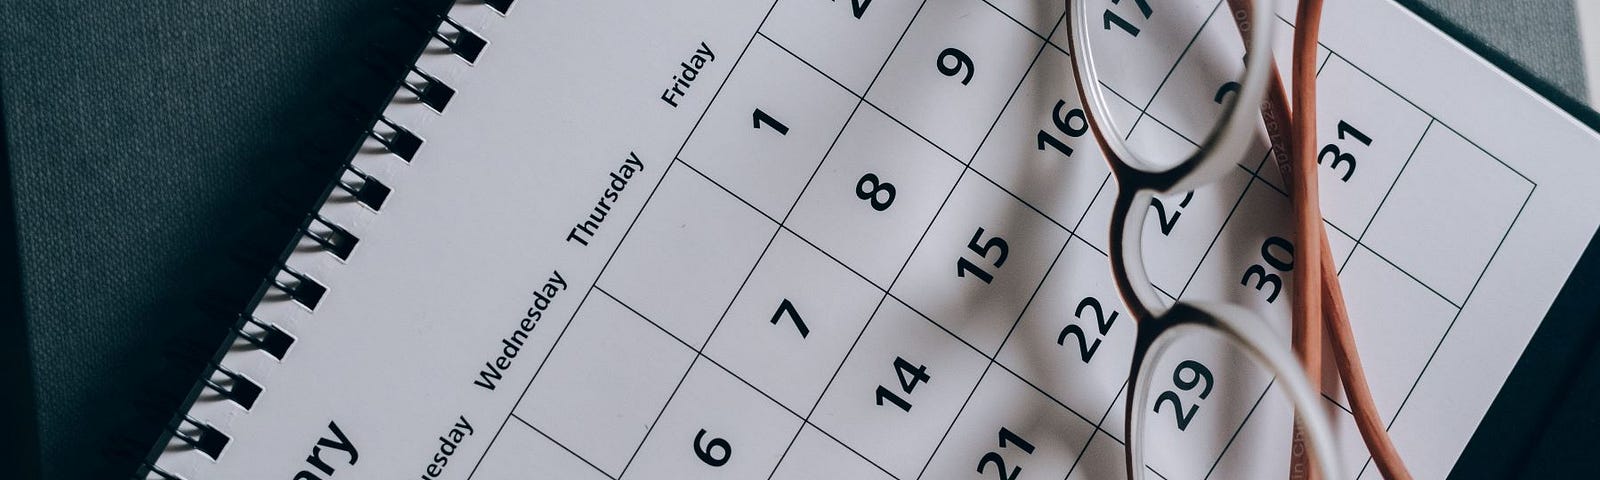 A calendar open to the month of January, with folded glasses sitting on it.